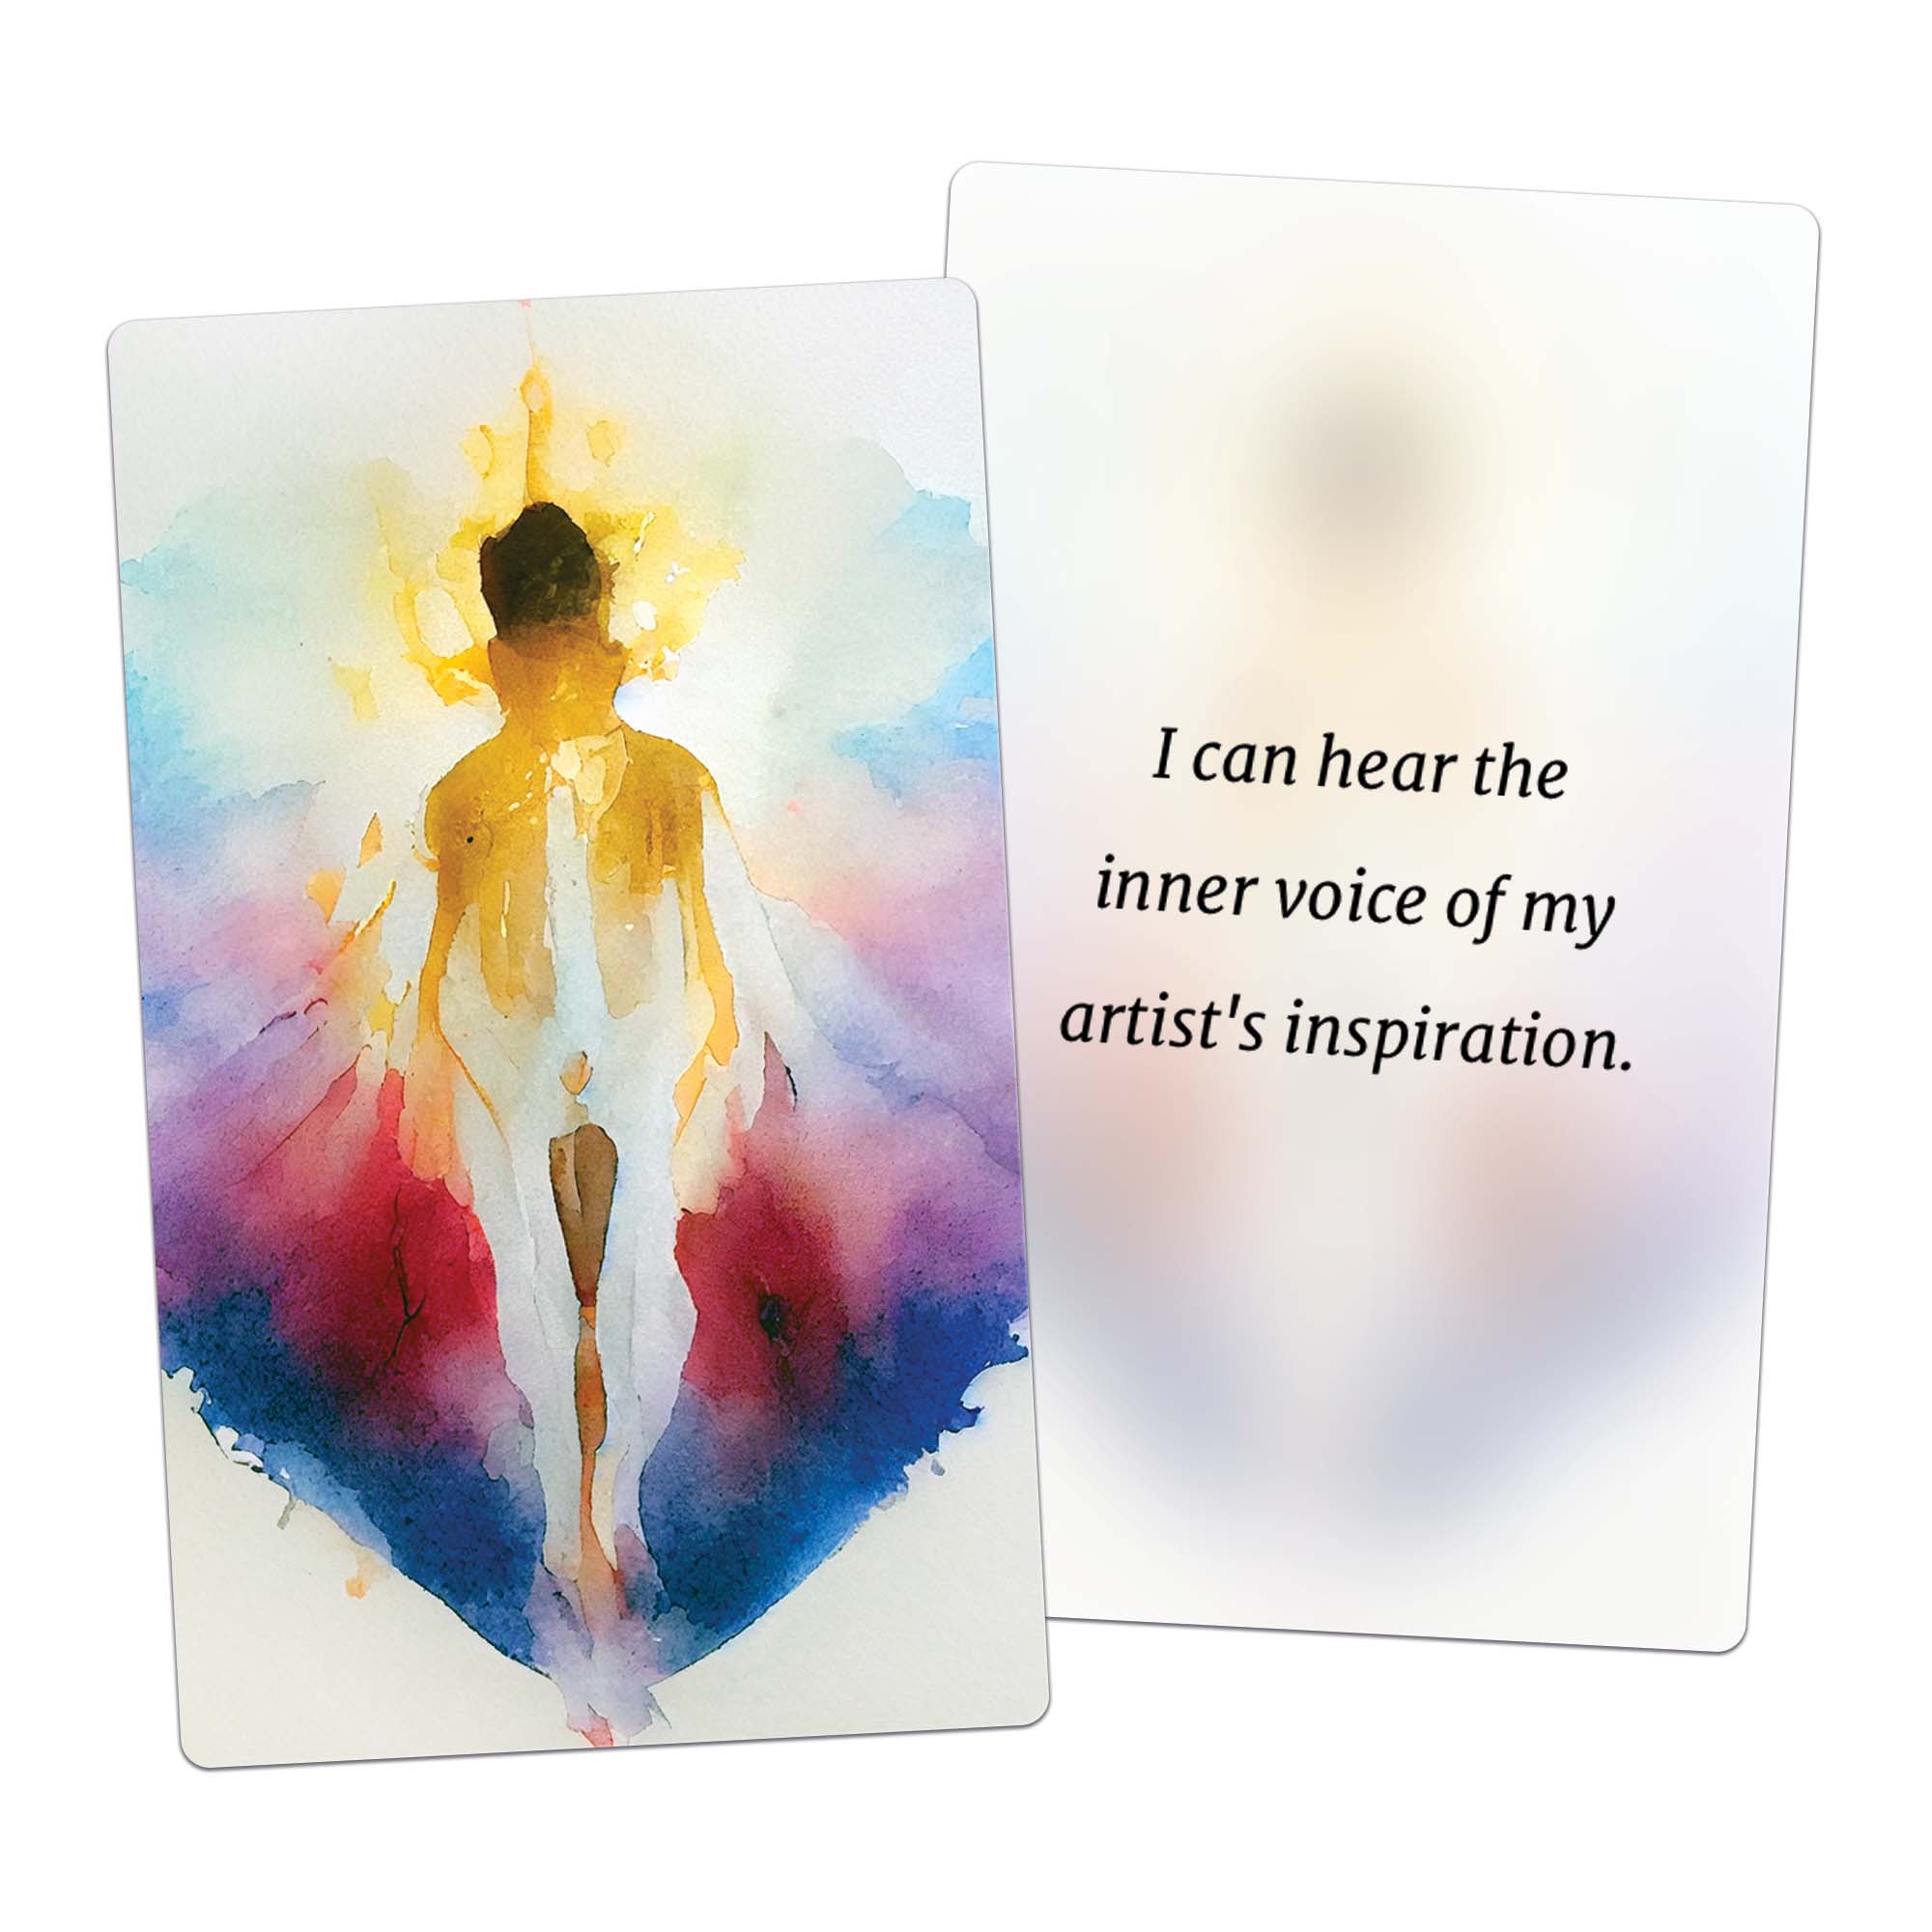 I can hear the inner voice of my artist's inspiration. (AFFIRMATION CARD)